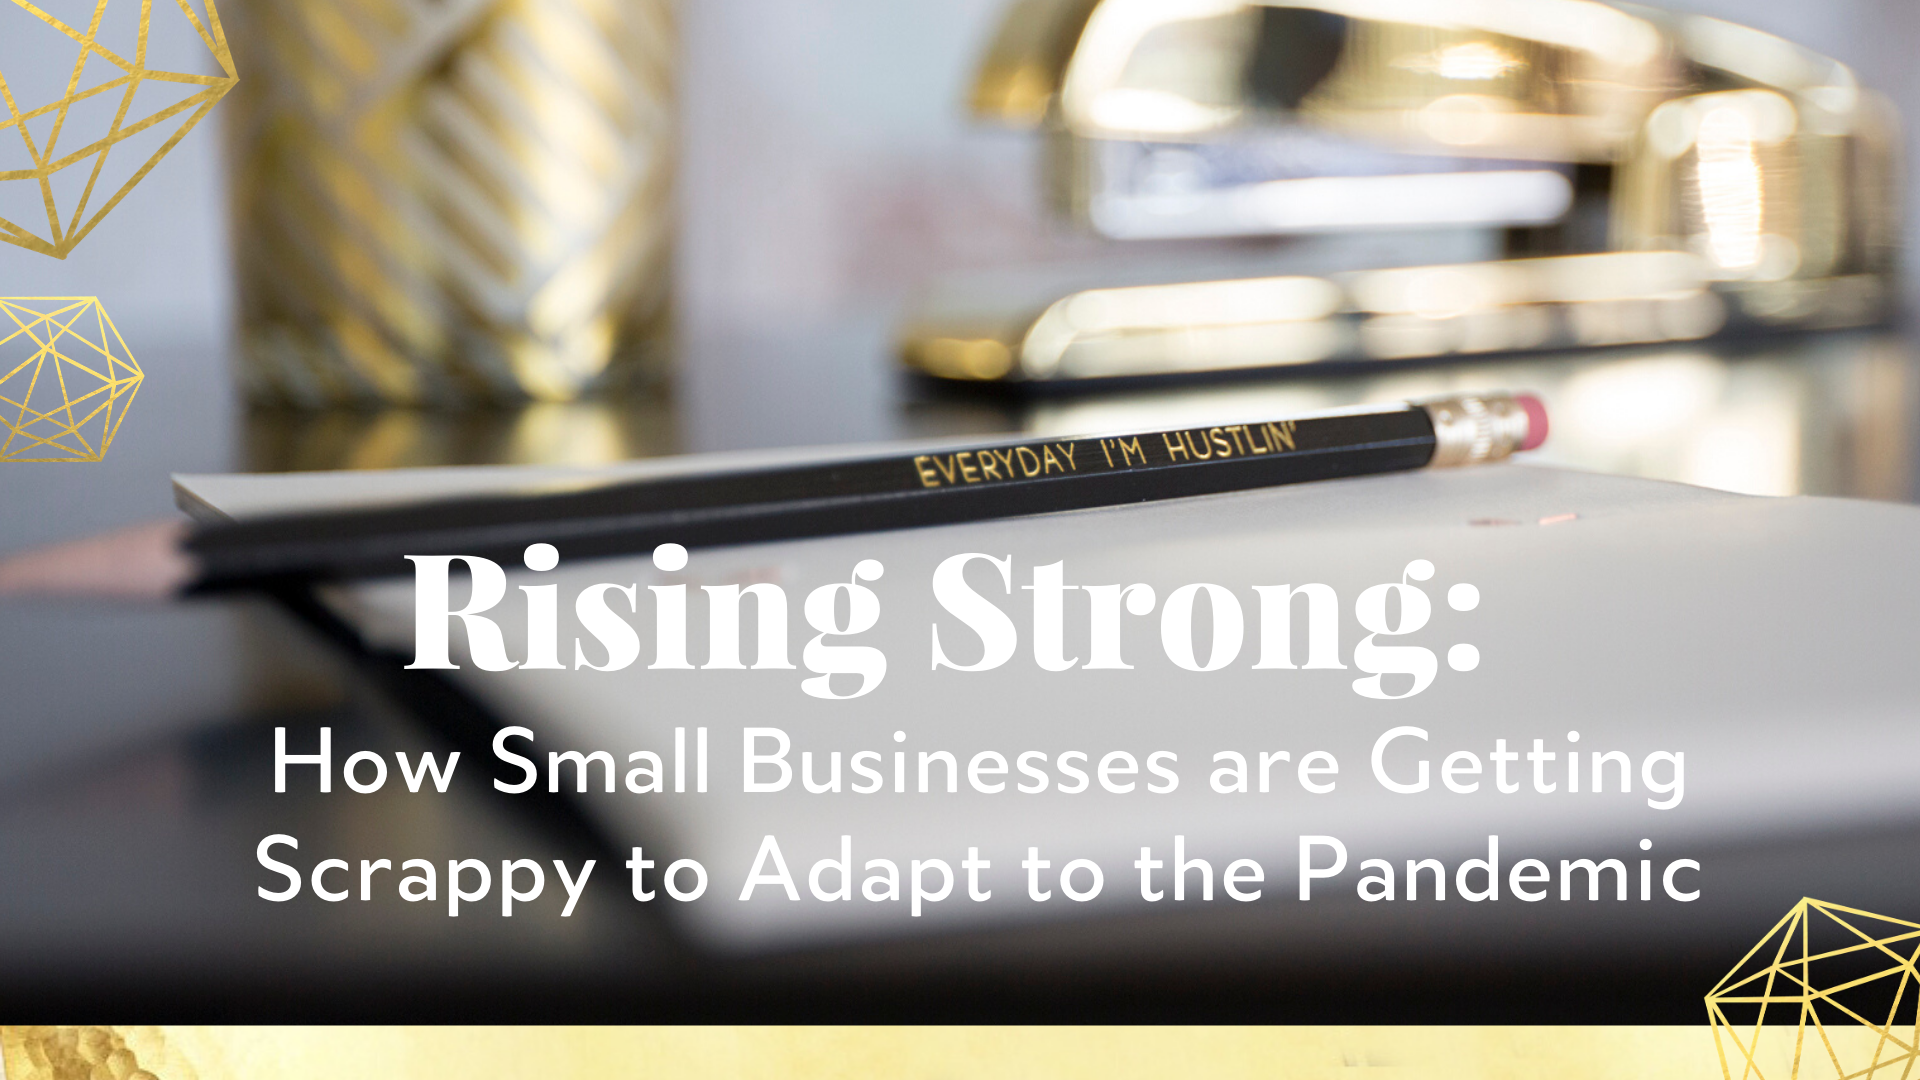 Rising Strong. how small businesses are getting scrappy to adapt to the pandemic